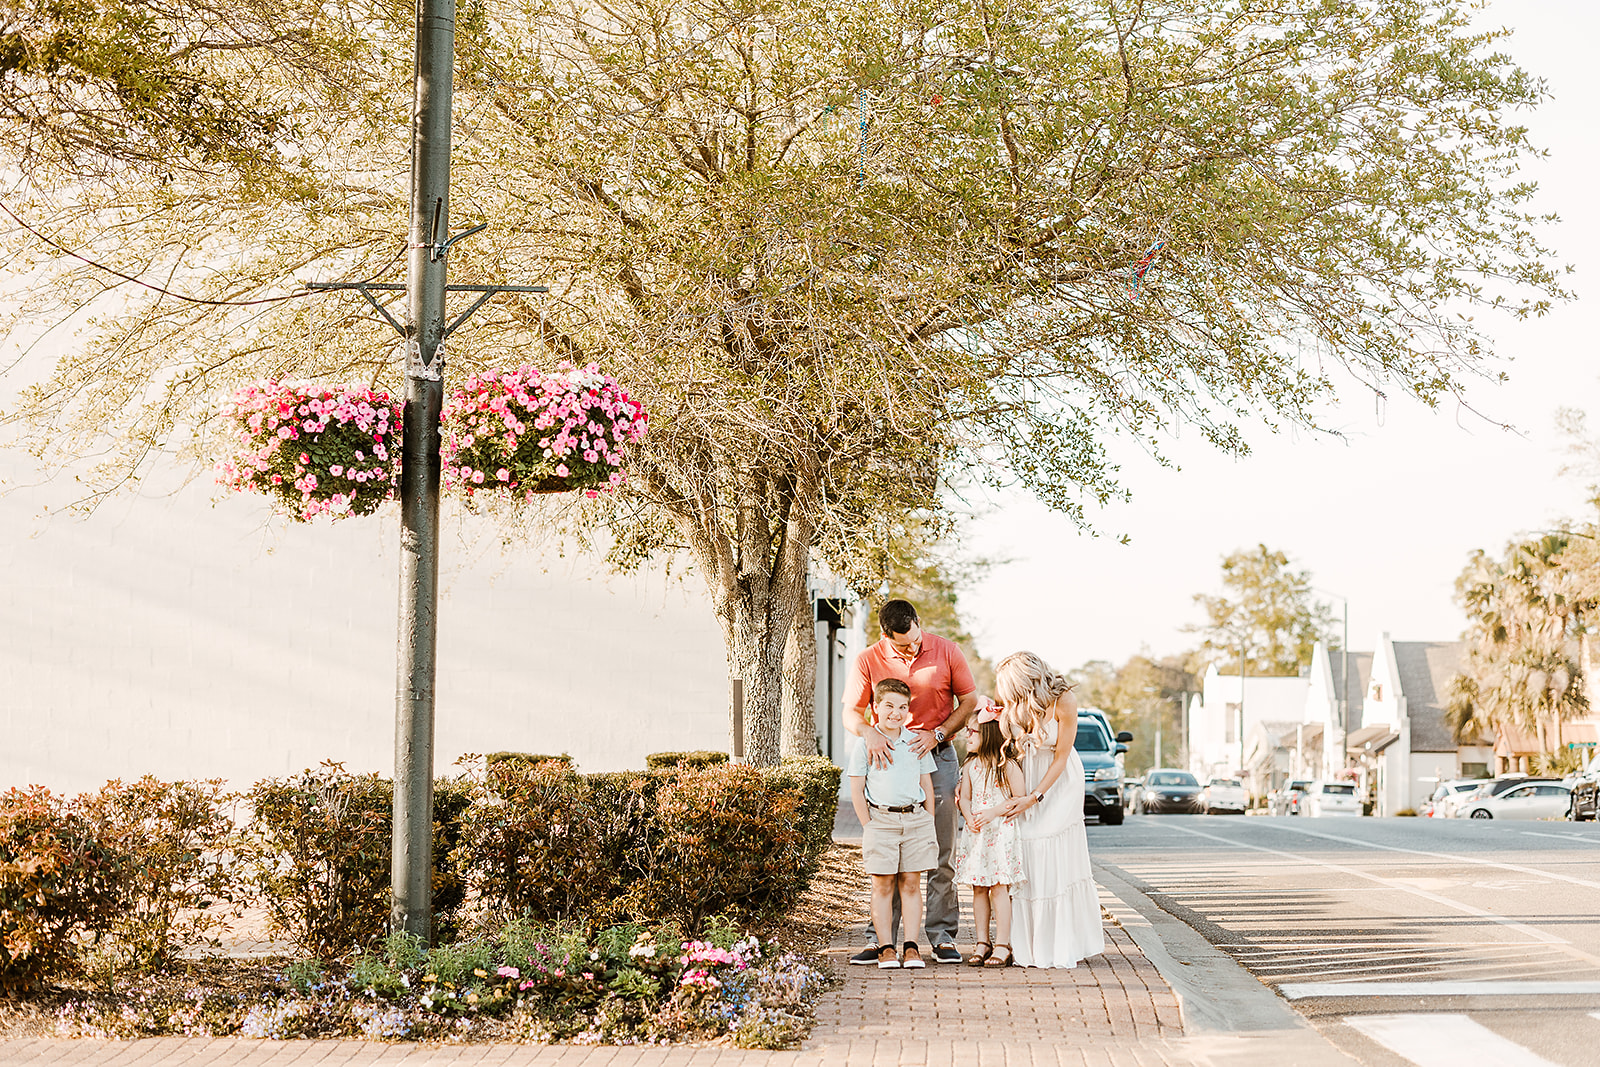 A family photoshoot in downtown Fairhope, AL with The Millers Photo Co